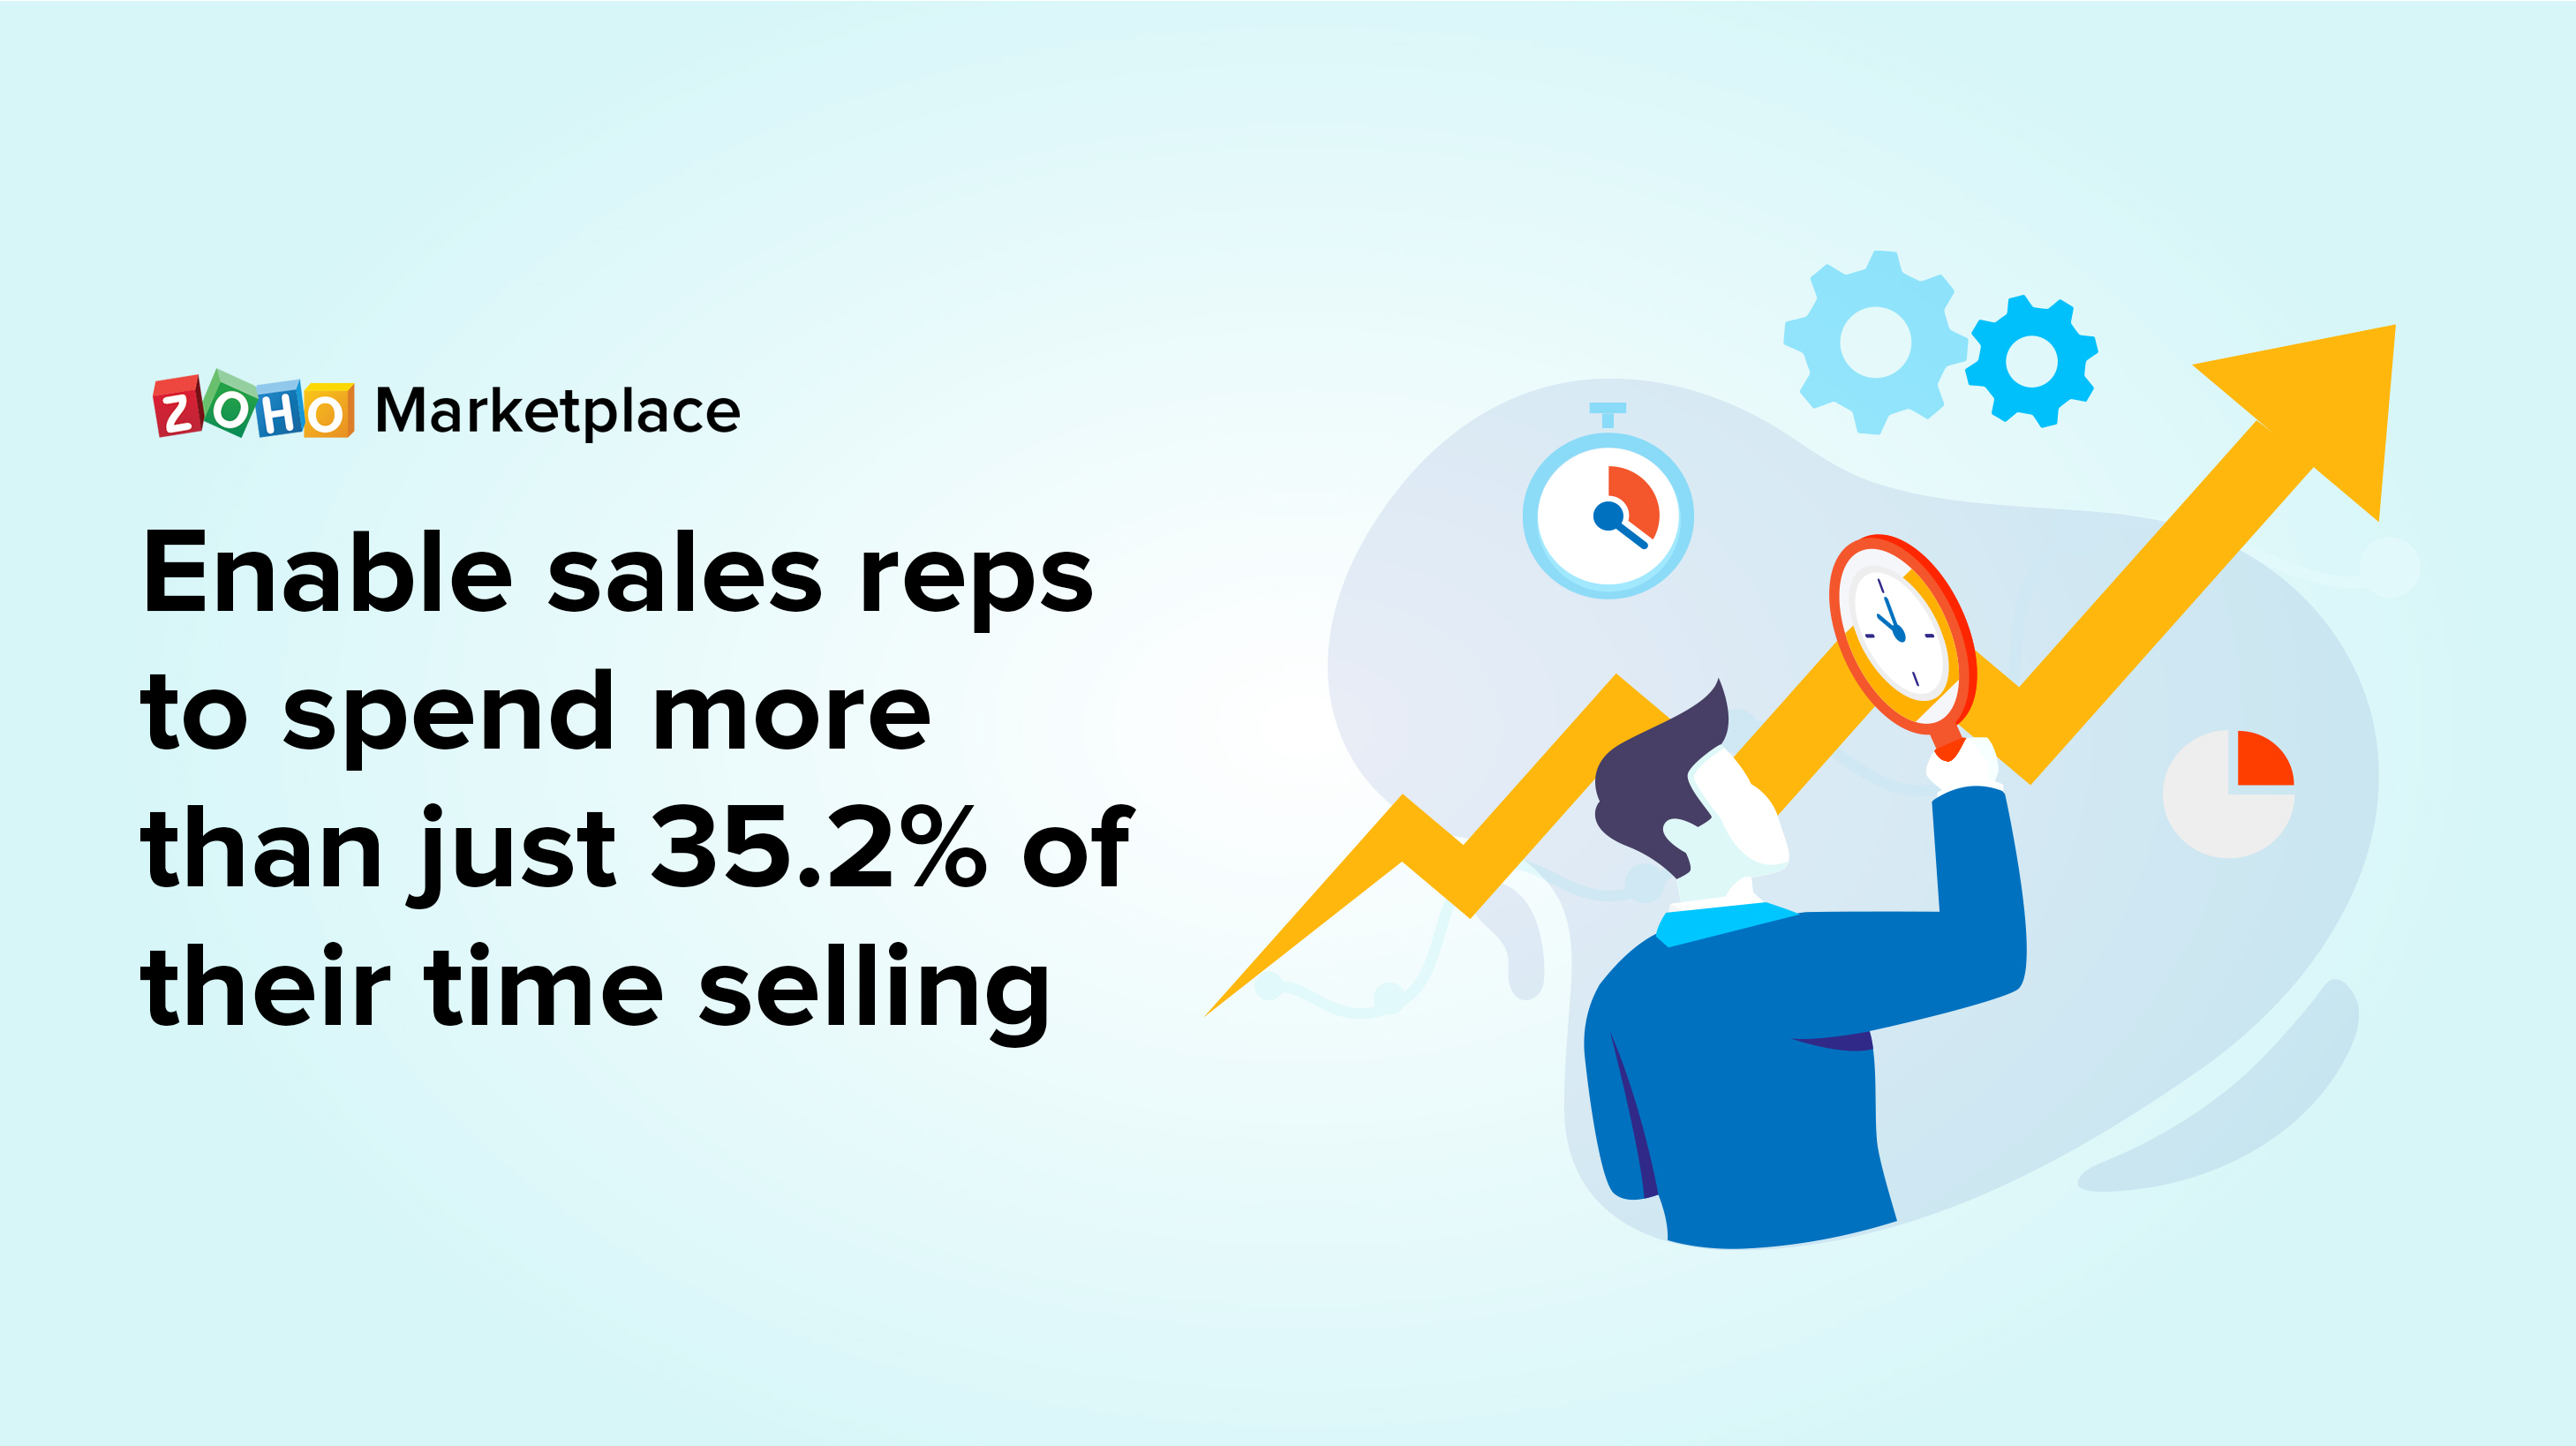 Strategies to enable sales reps to spend more time selling